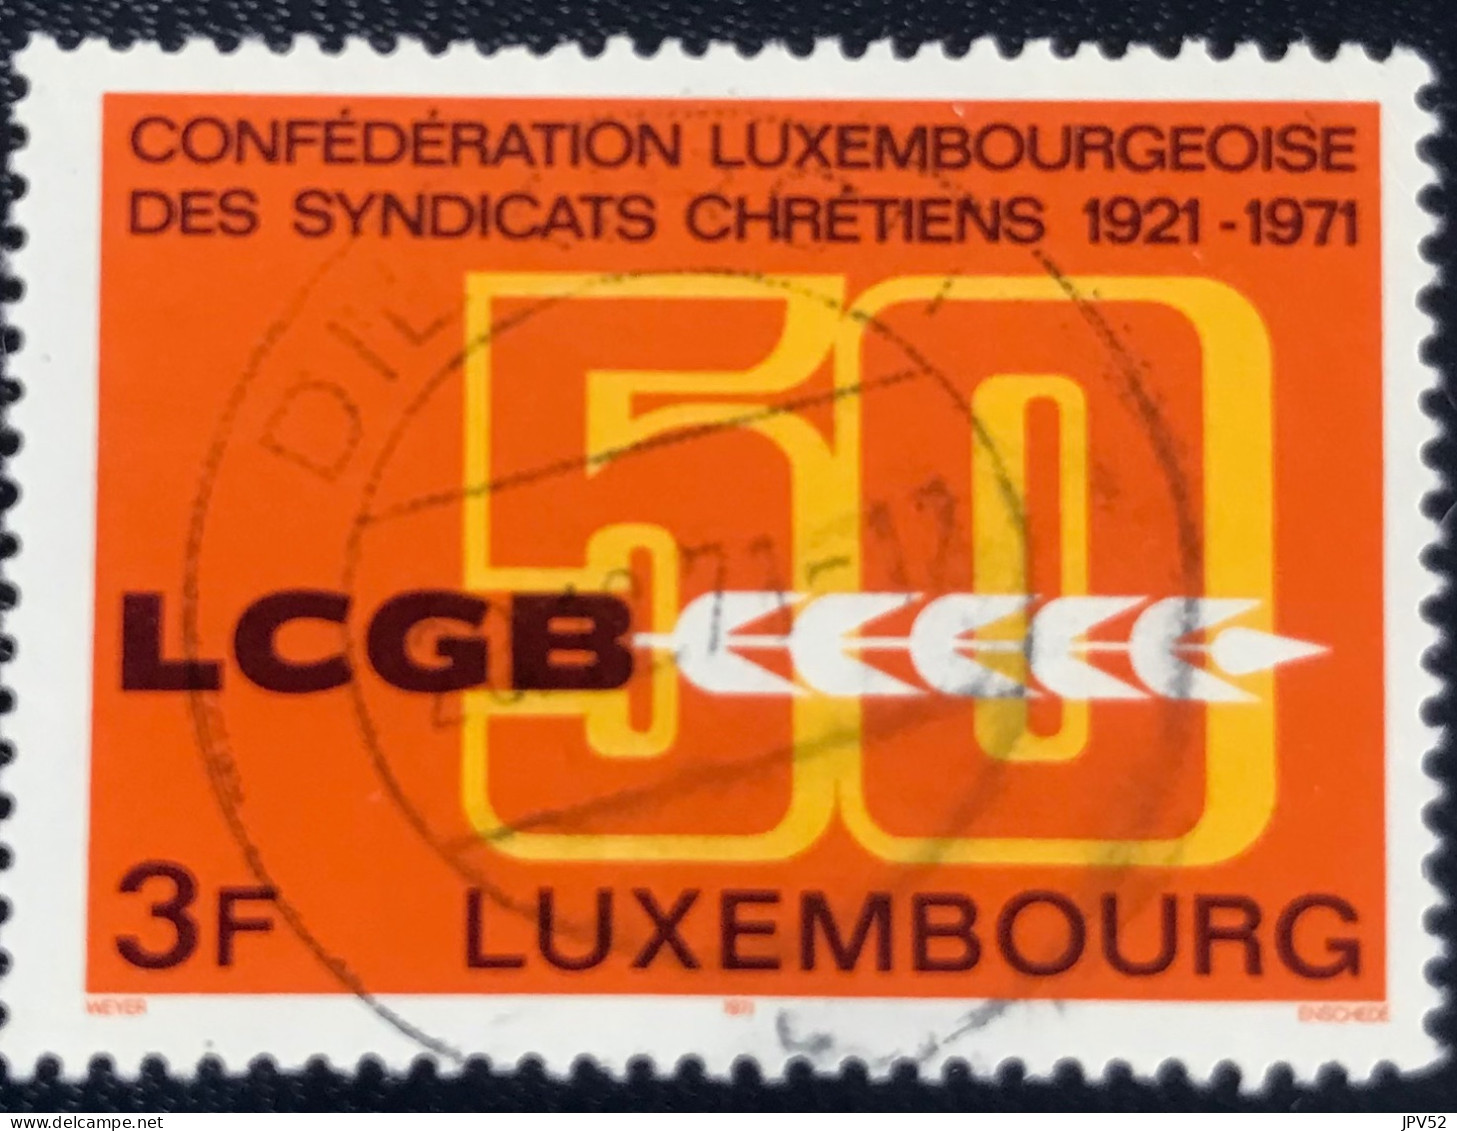 Luxembourg - Luxemburg - C18/31 - 1971 - (°)used - Michel 827 - LCGB Embleem - Used Stamps